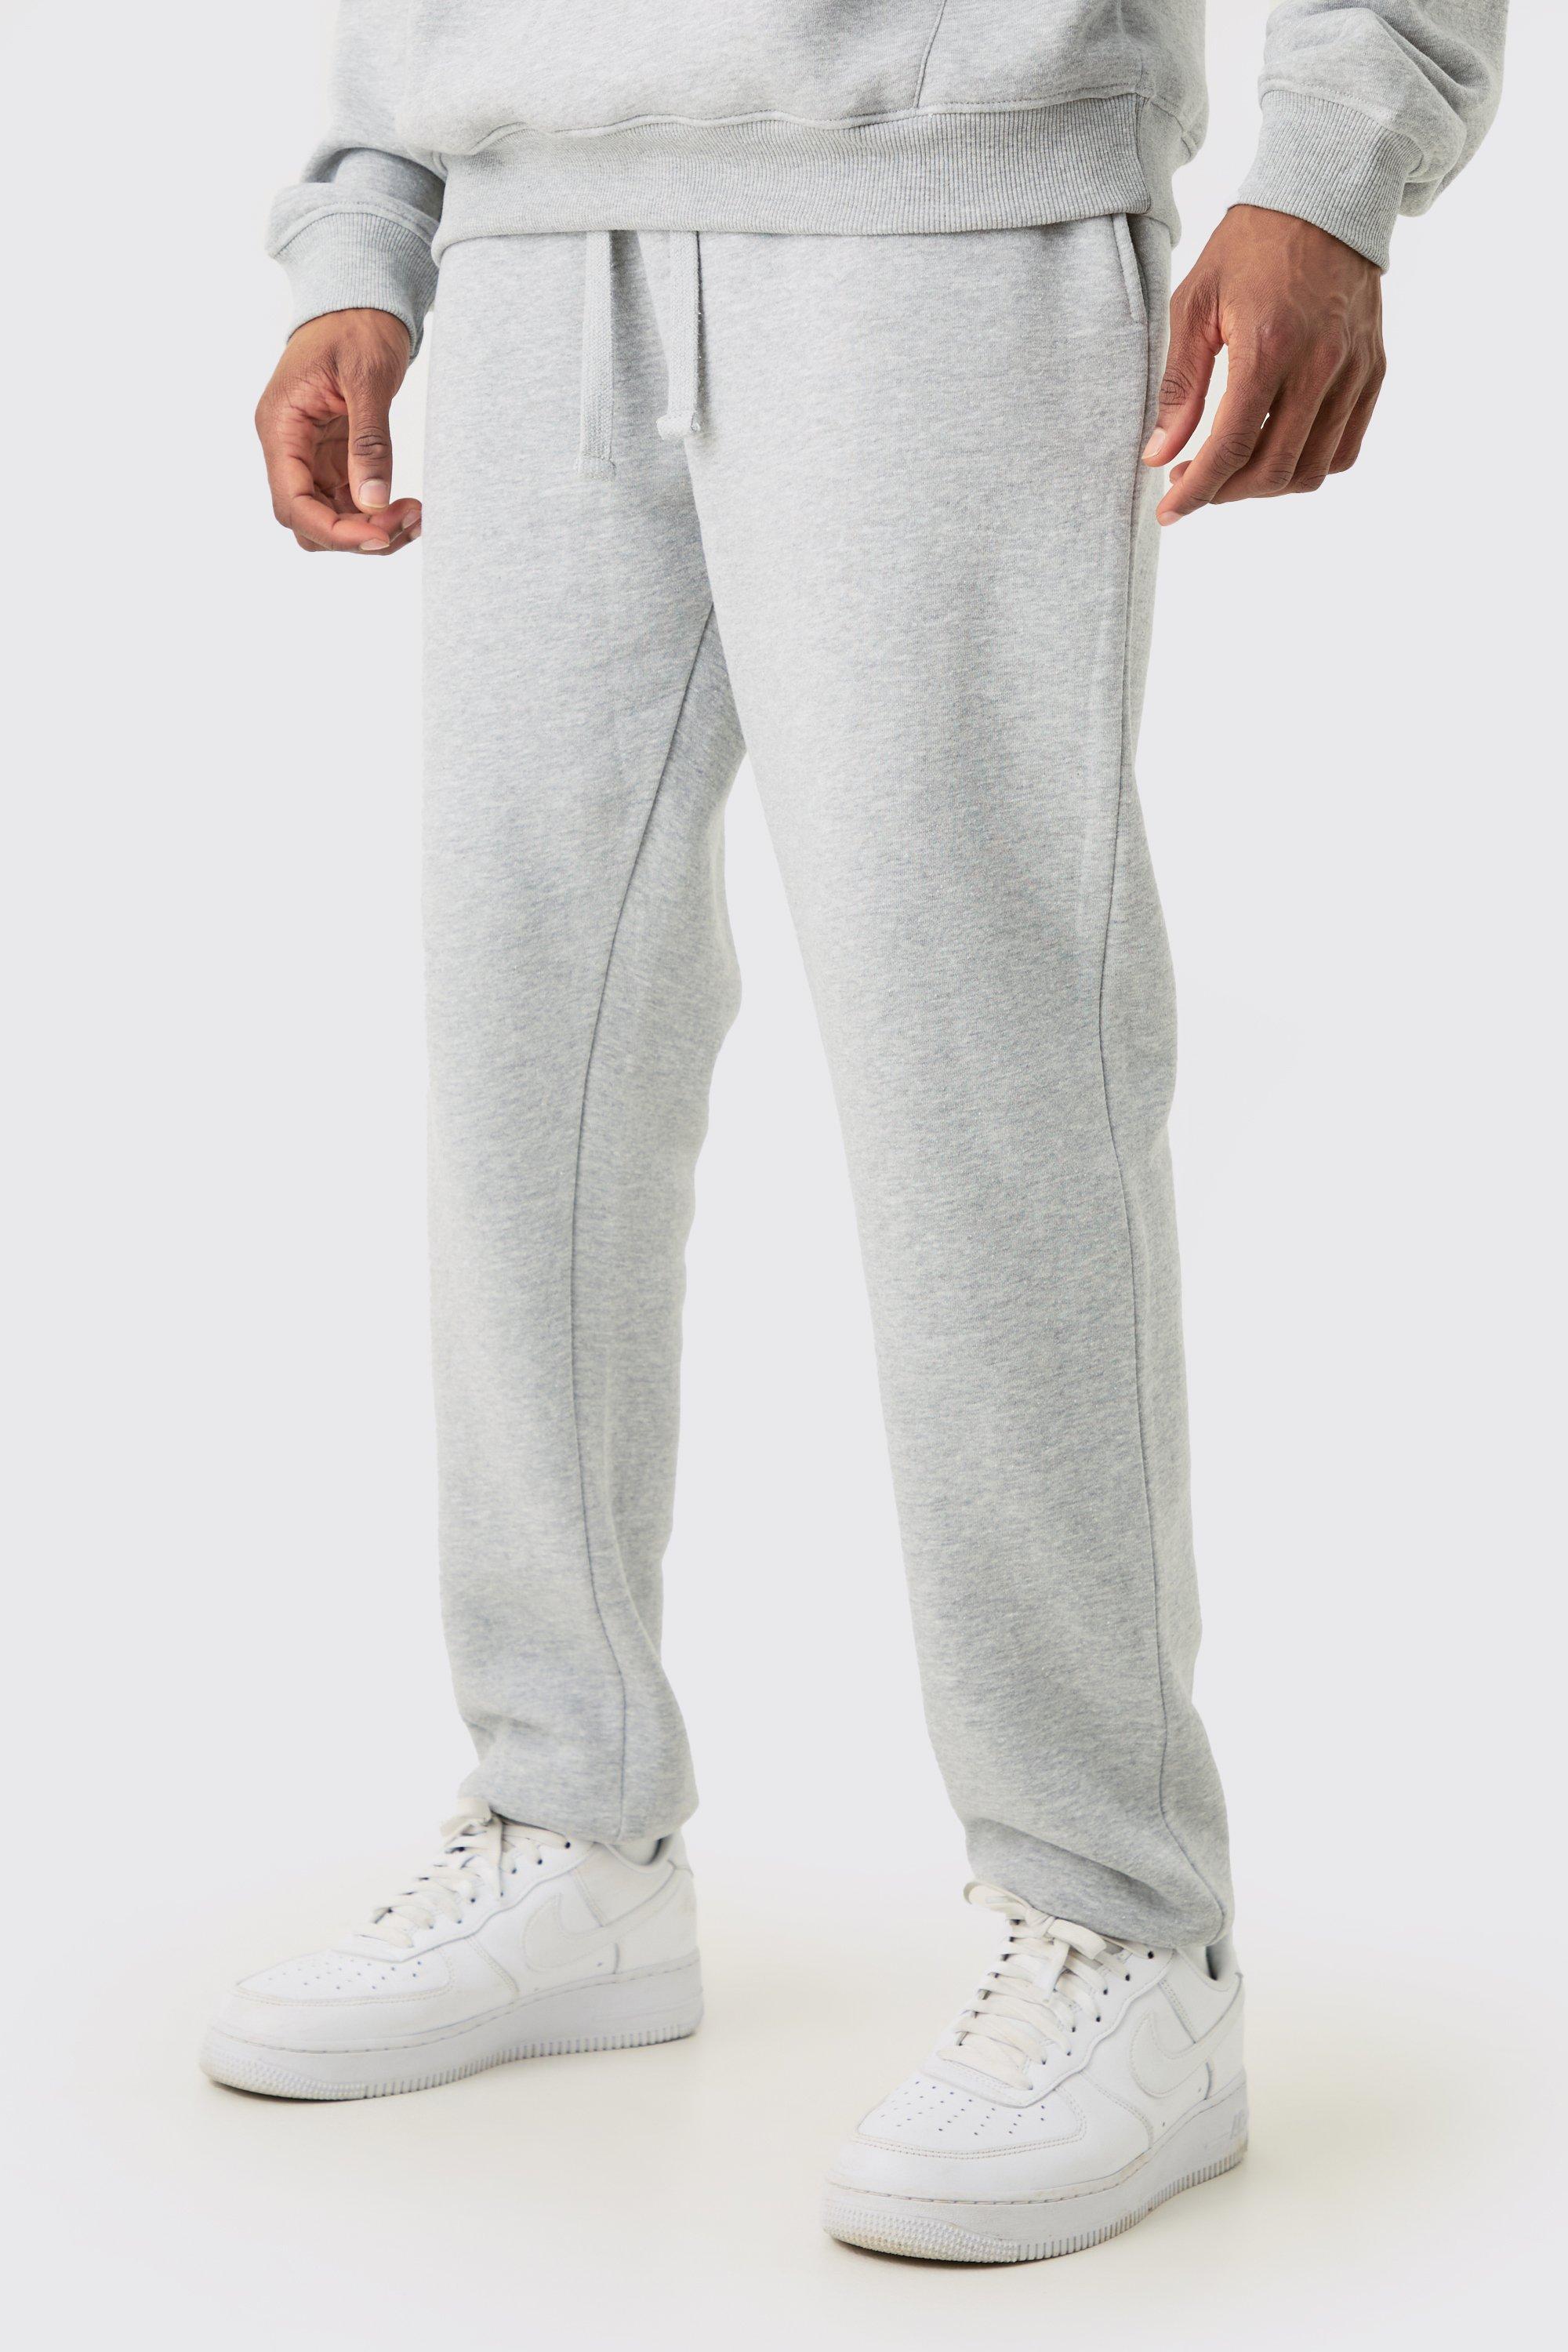 Image of Tall Basic Slim Fit Jogger In Grey Marl, Grigio